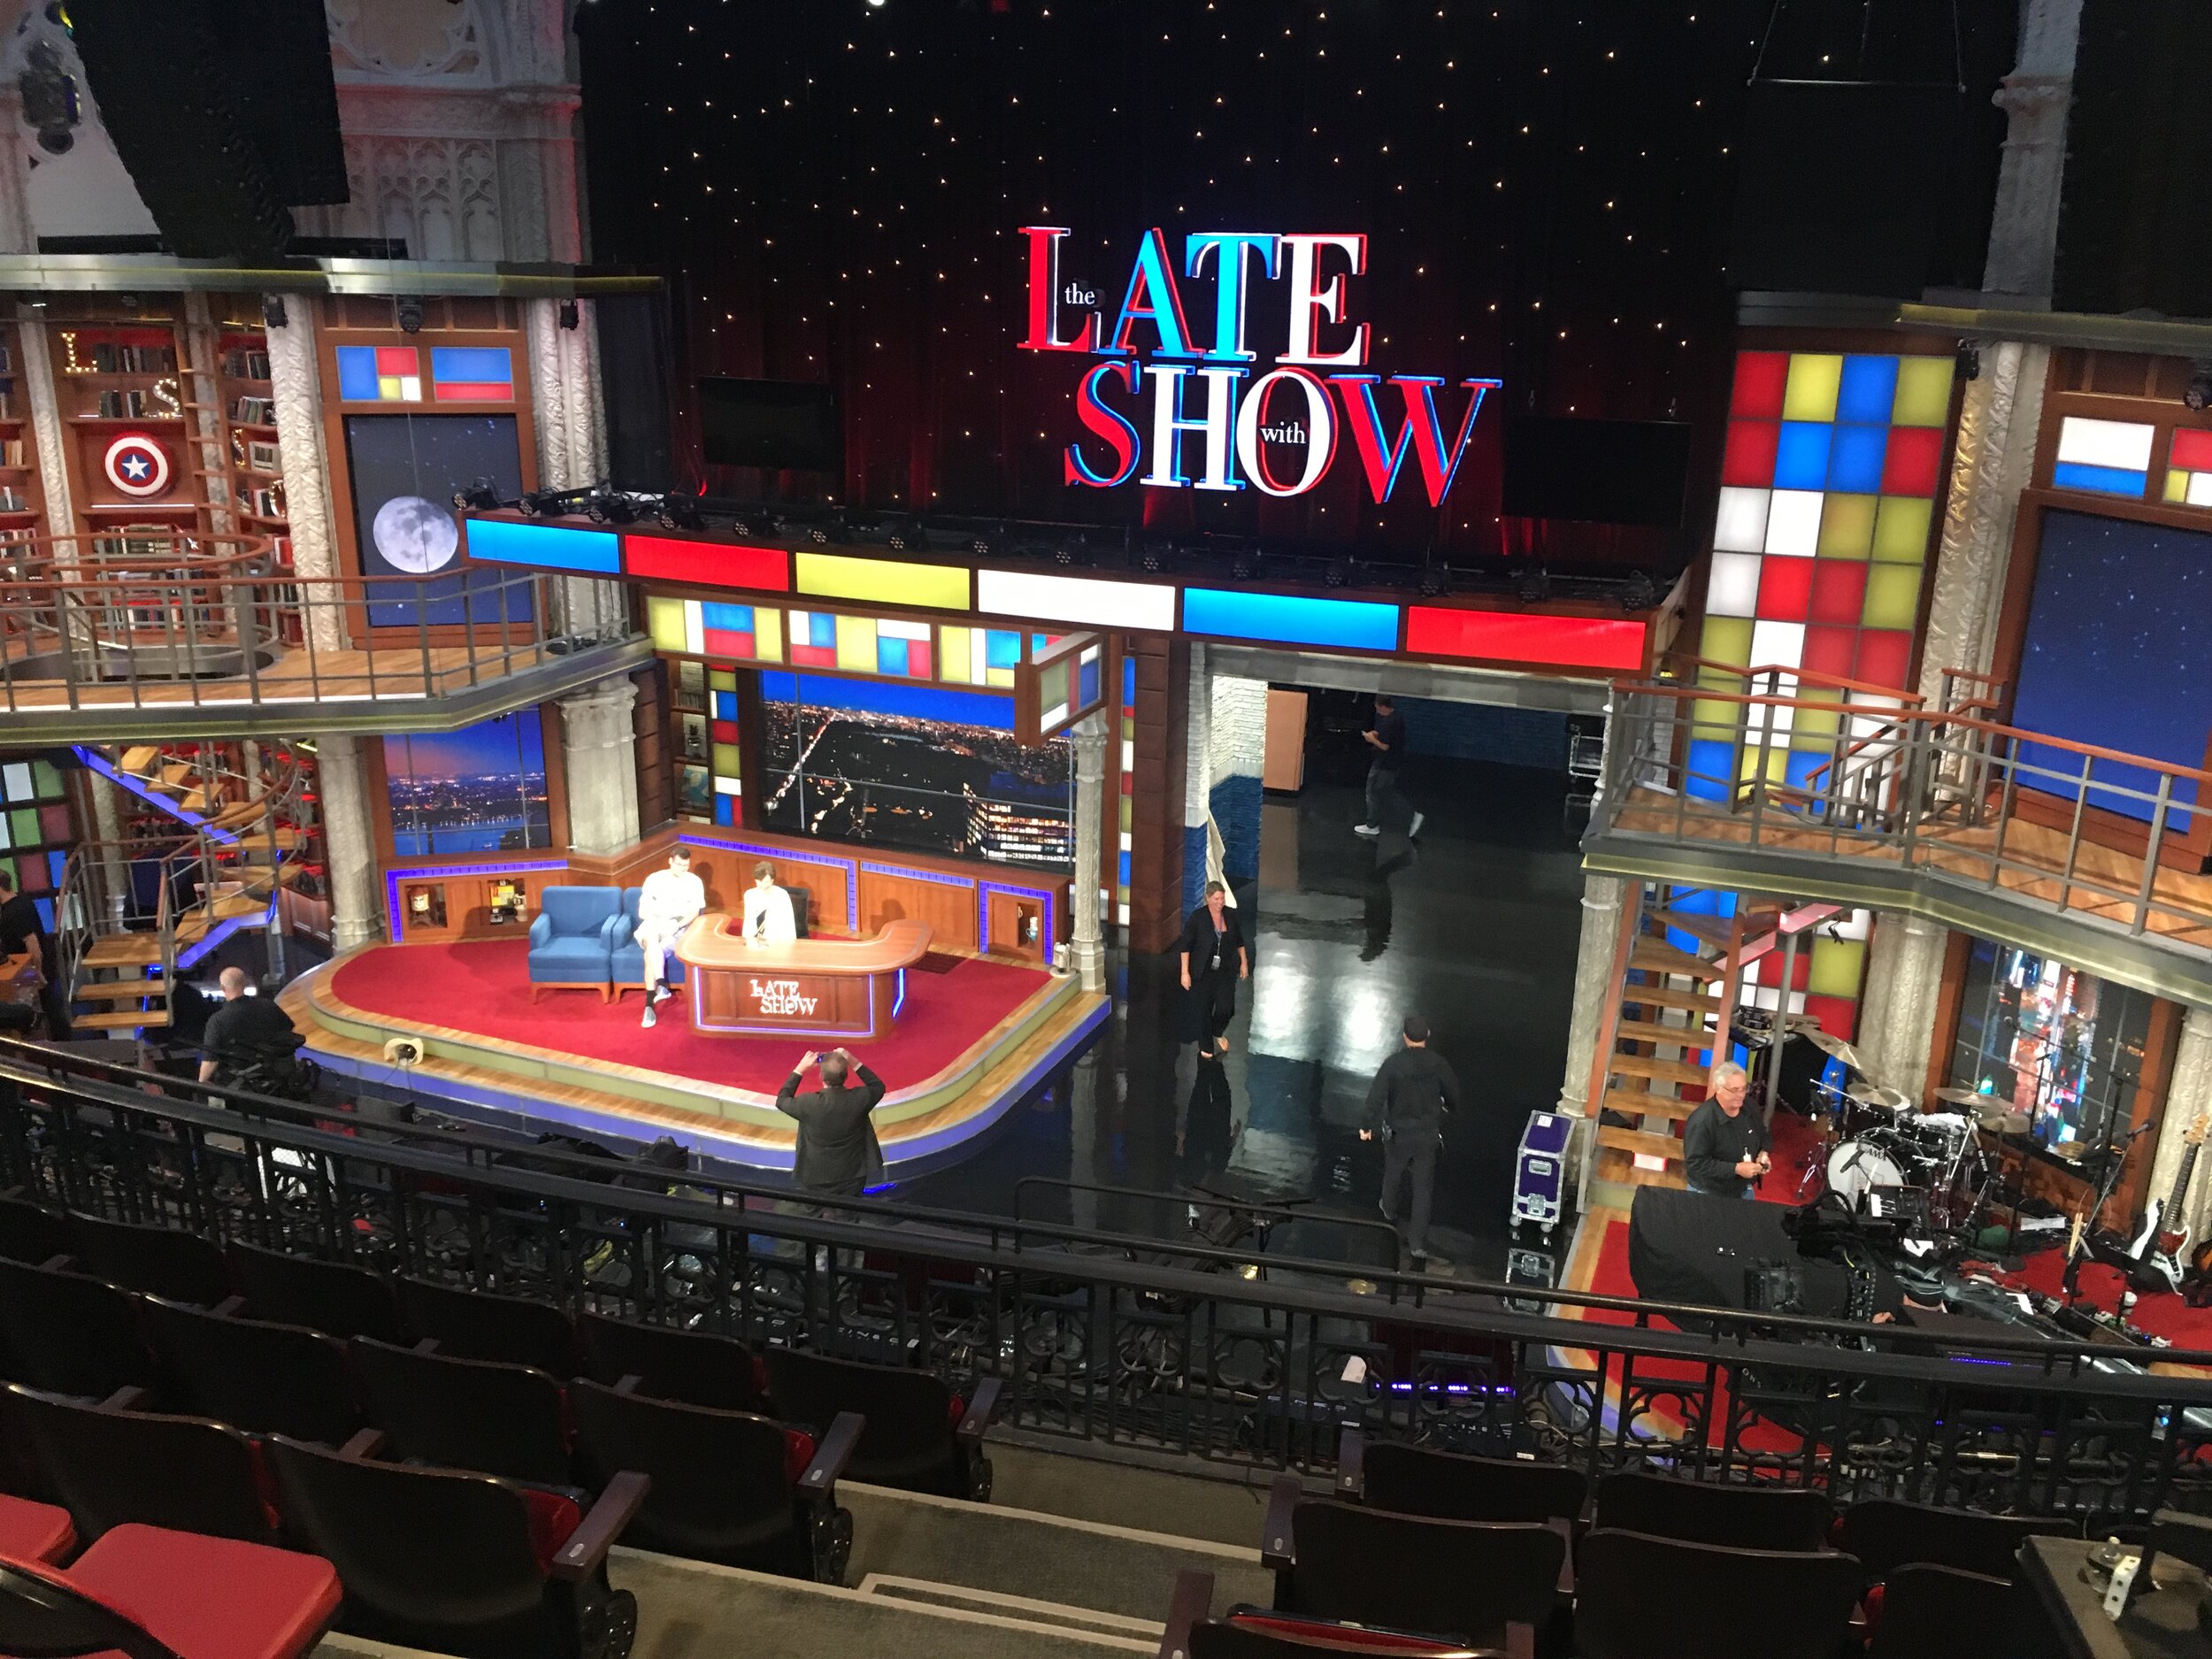  Scored free tix to the Late Show with Stephen Colbert while in NYC! 